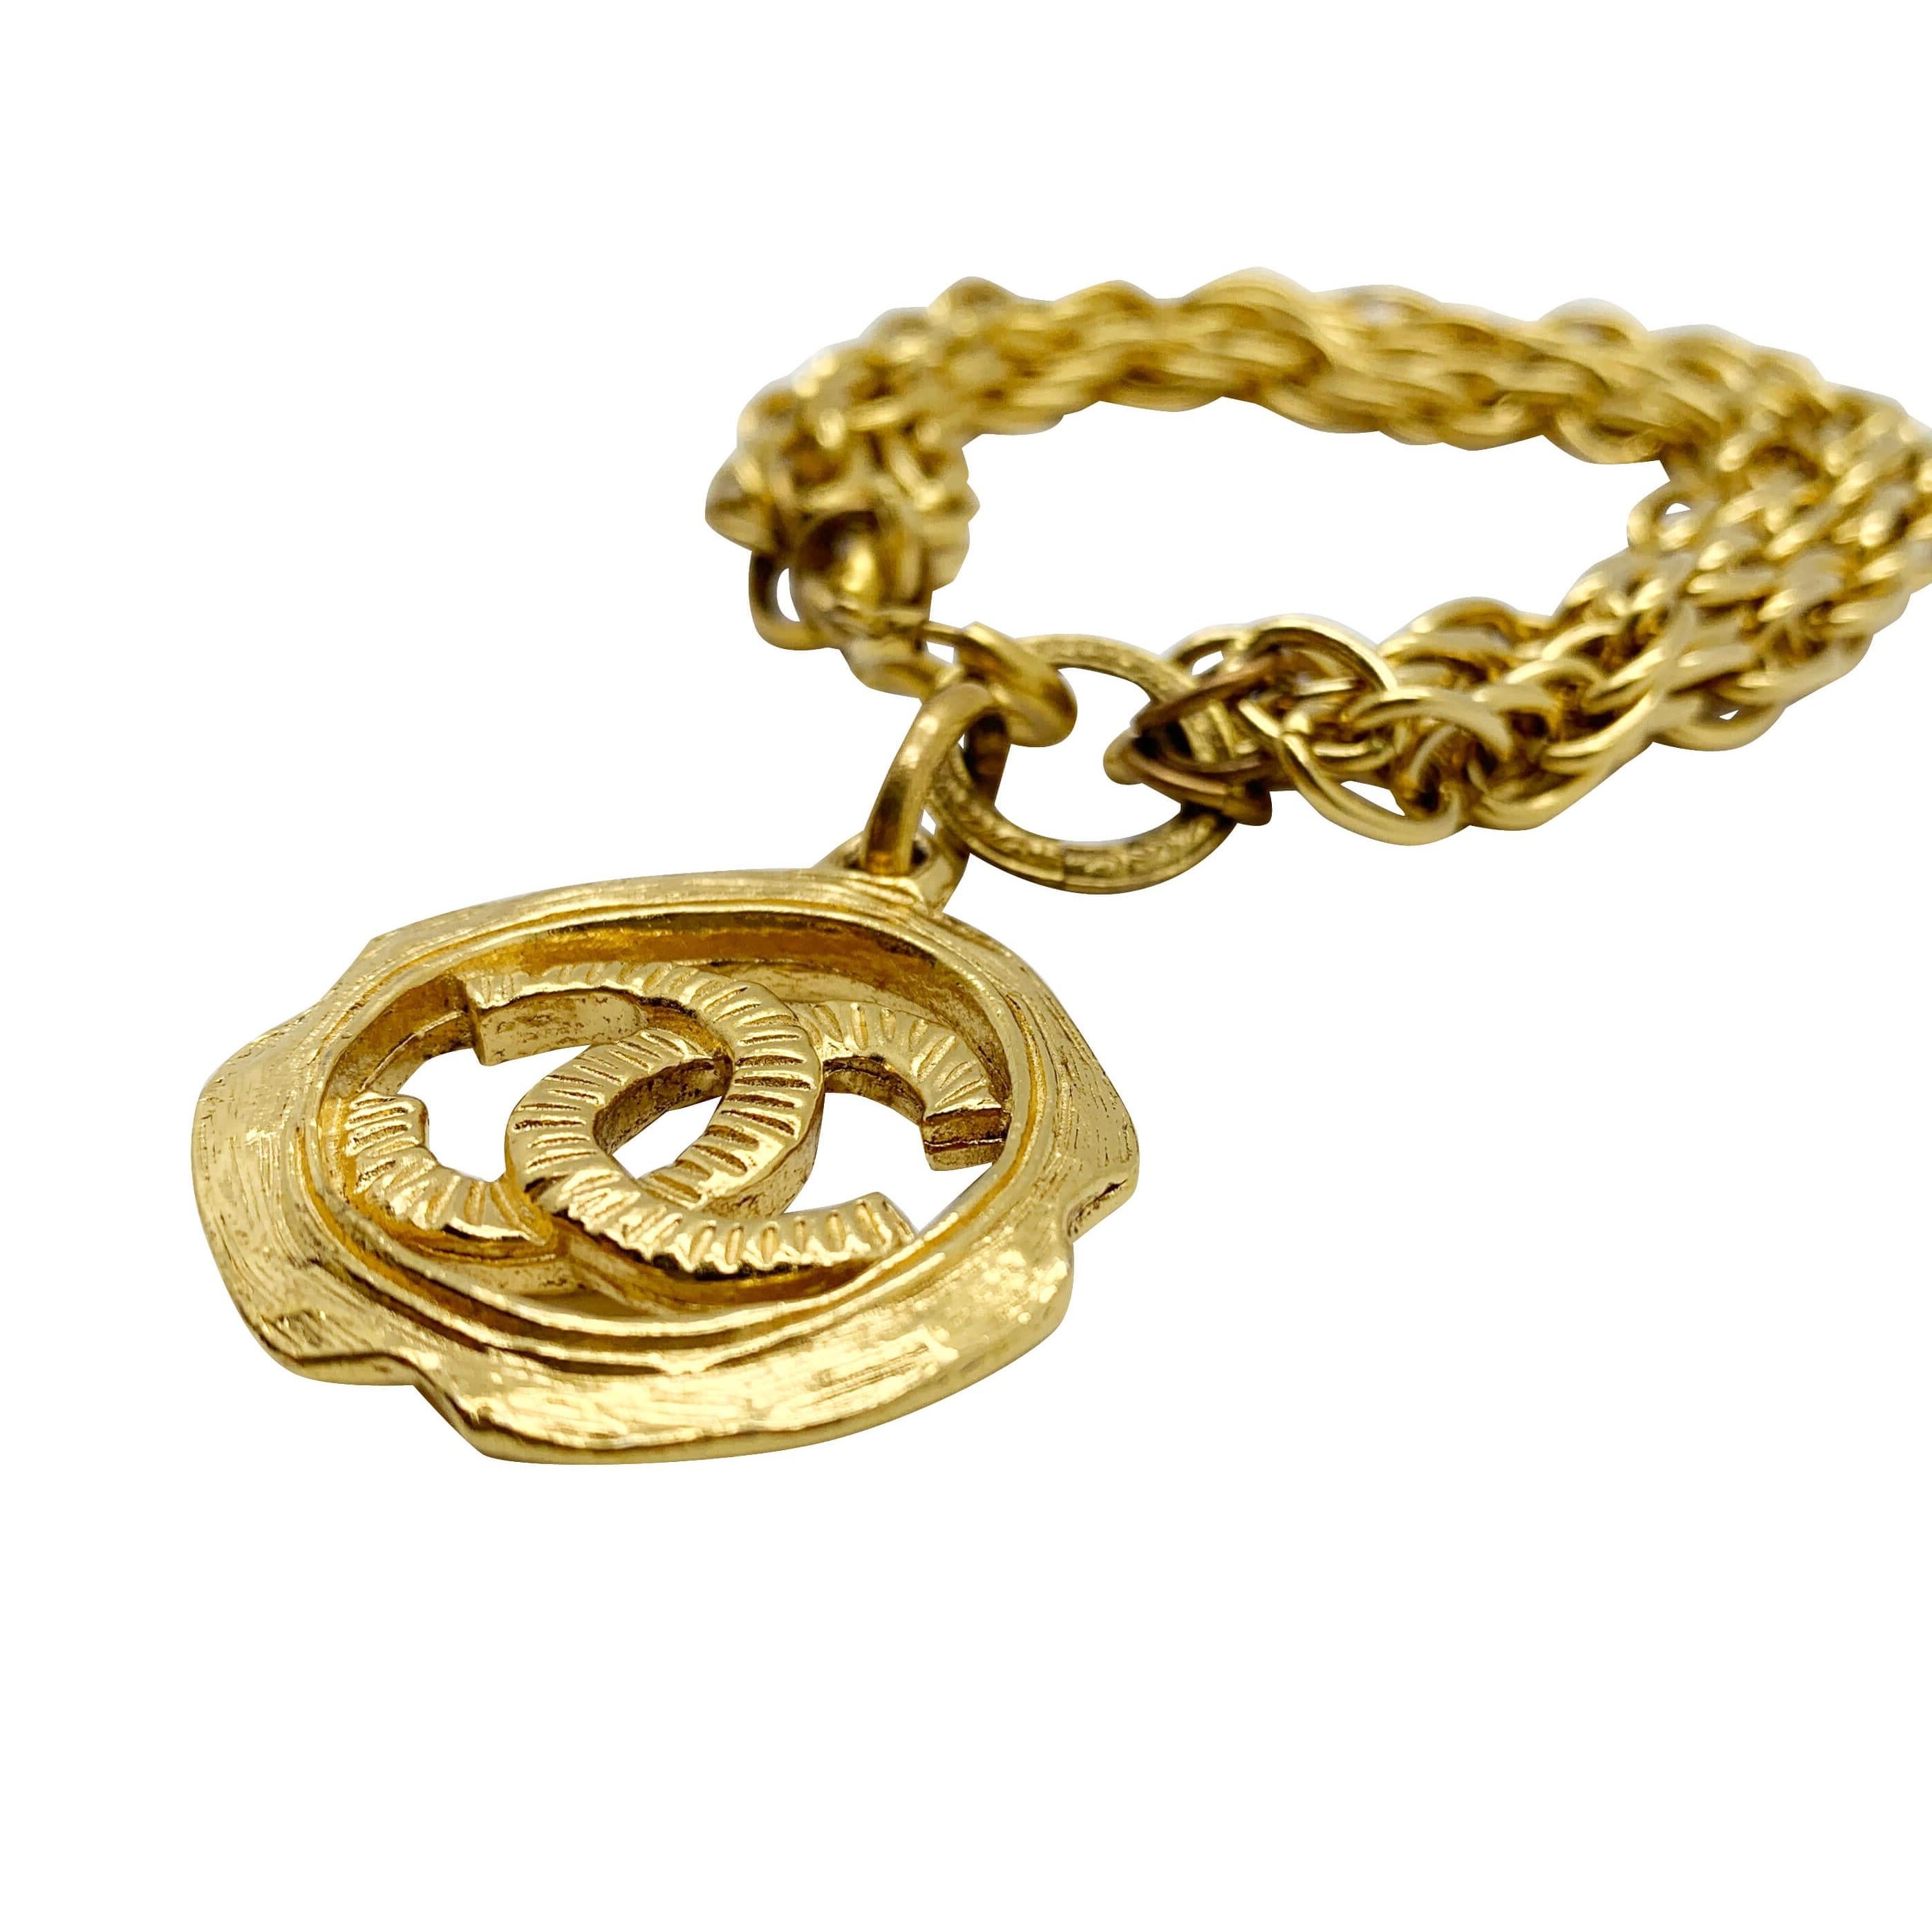 Our Vintage Chanel Logo Charm Bracelet. A stunning statement charm bracelet from the House of Chanel hailing from the uber glam 1980s and the now legendary era of Karl Lagerfeld and Victoire de Castellane. The large interlocking CC motif medallion